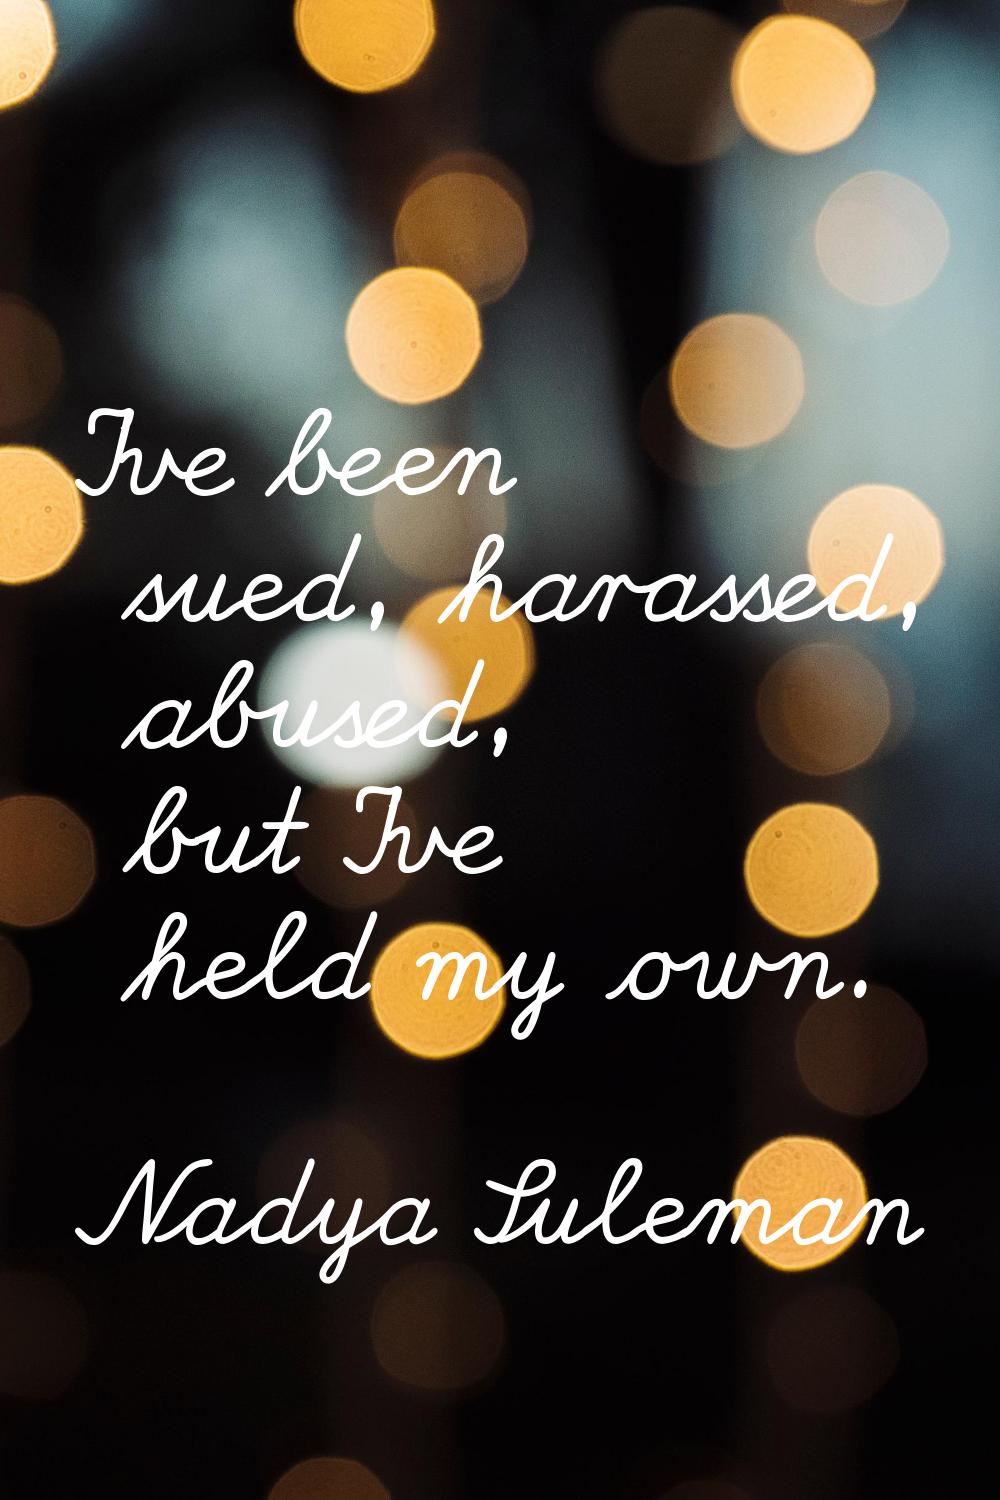 I've been sued, harassed, abused, but I've held my own.